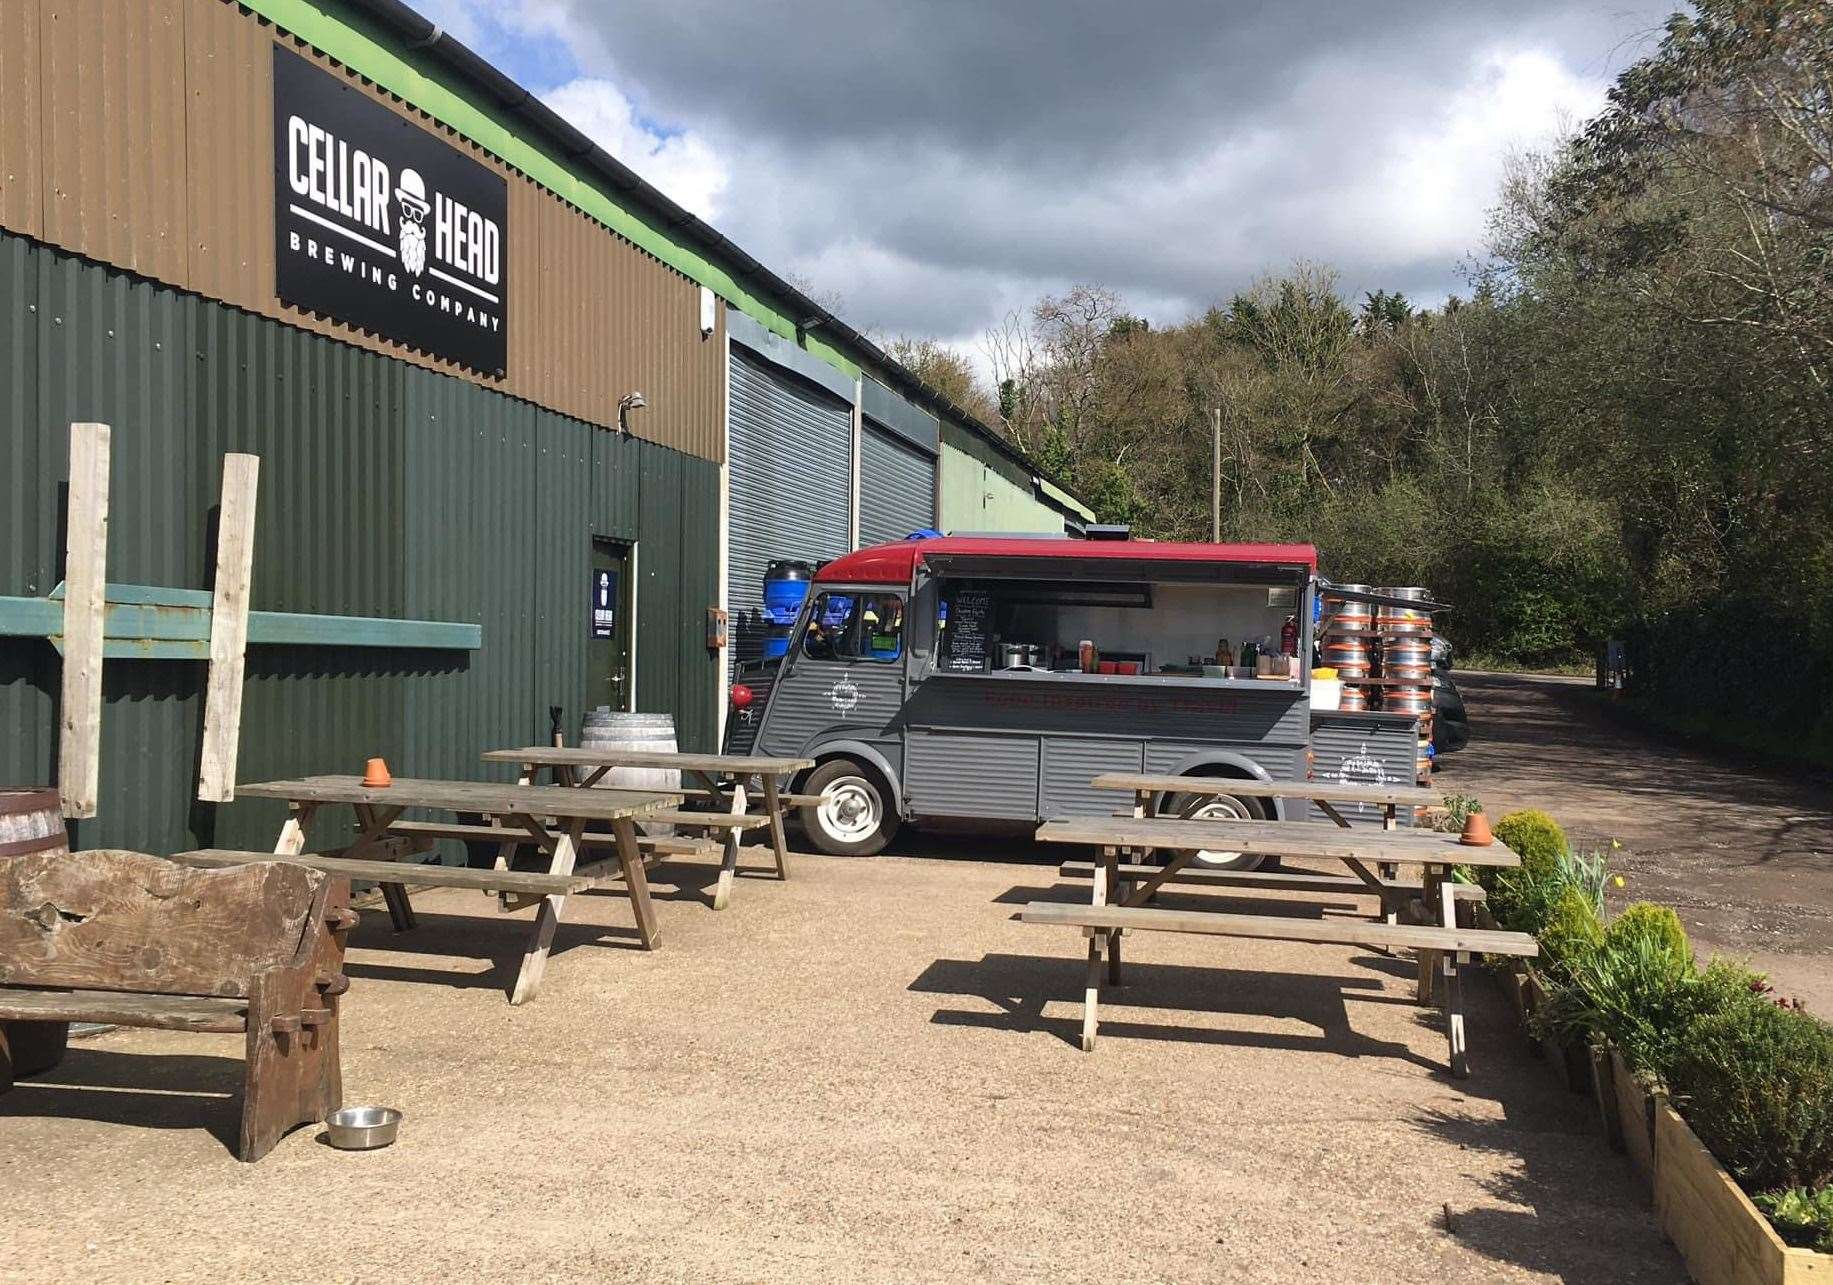 Cellar Head Brewing Company & Tap Room in Flimwell, near Goudhurst, went into administration last month. Picture: Wanderlust Street Food